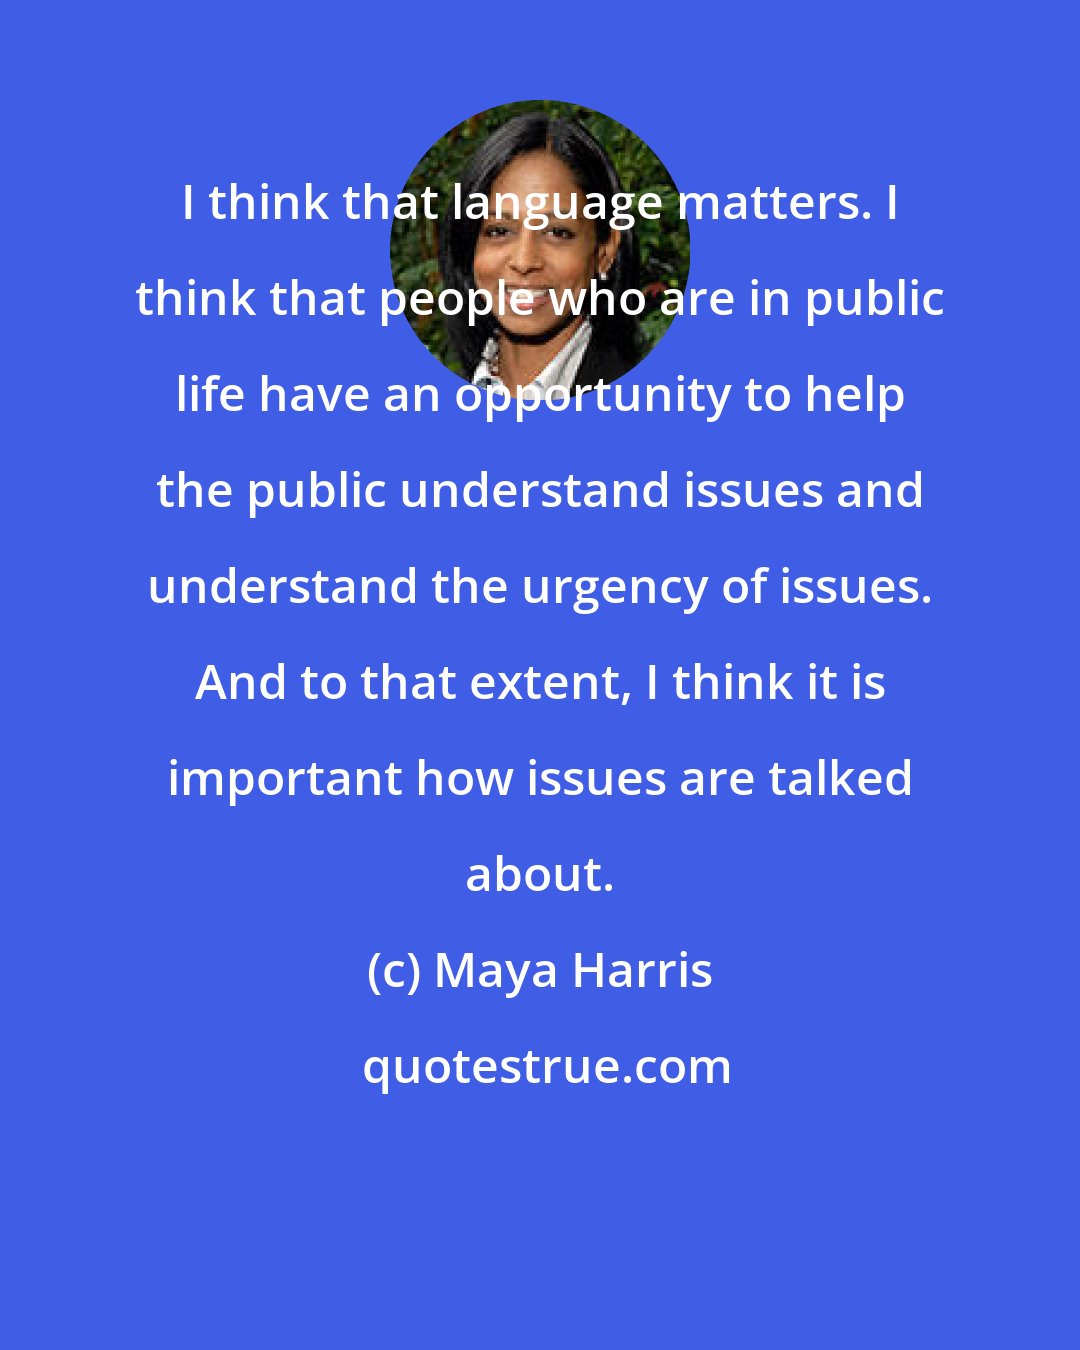 Maya Harris: I think that language matters. I think that people who are in public life have an opportunity to help the public understand issues and understand the urgency of issues. And to that extent, I think it is important how issues are talked about.